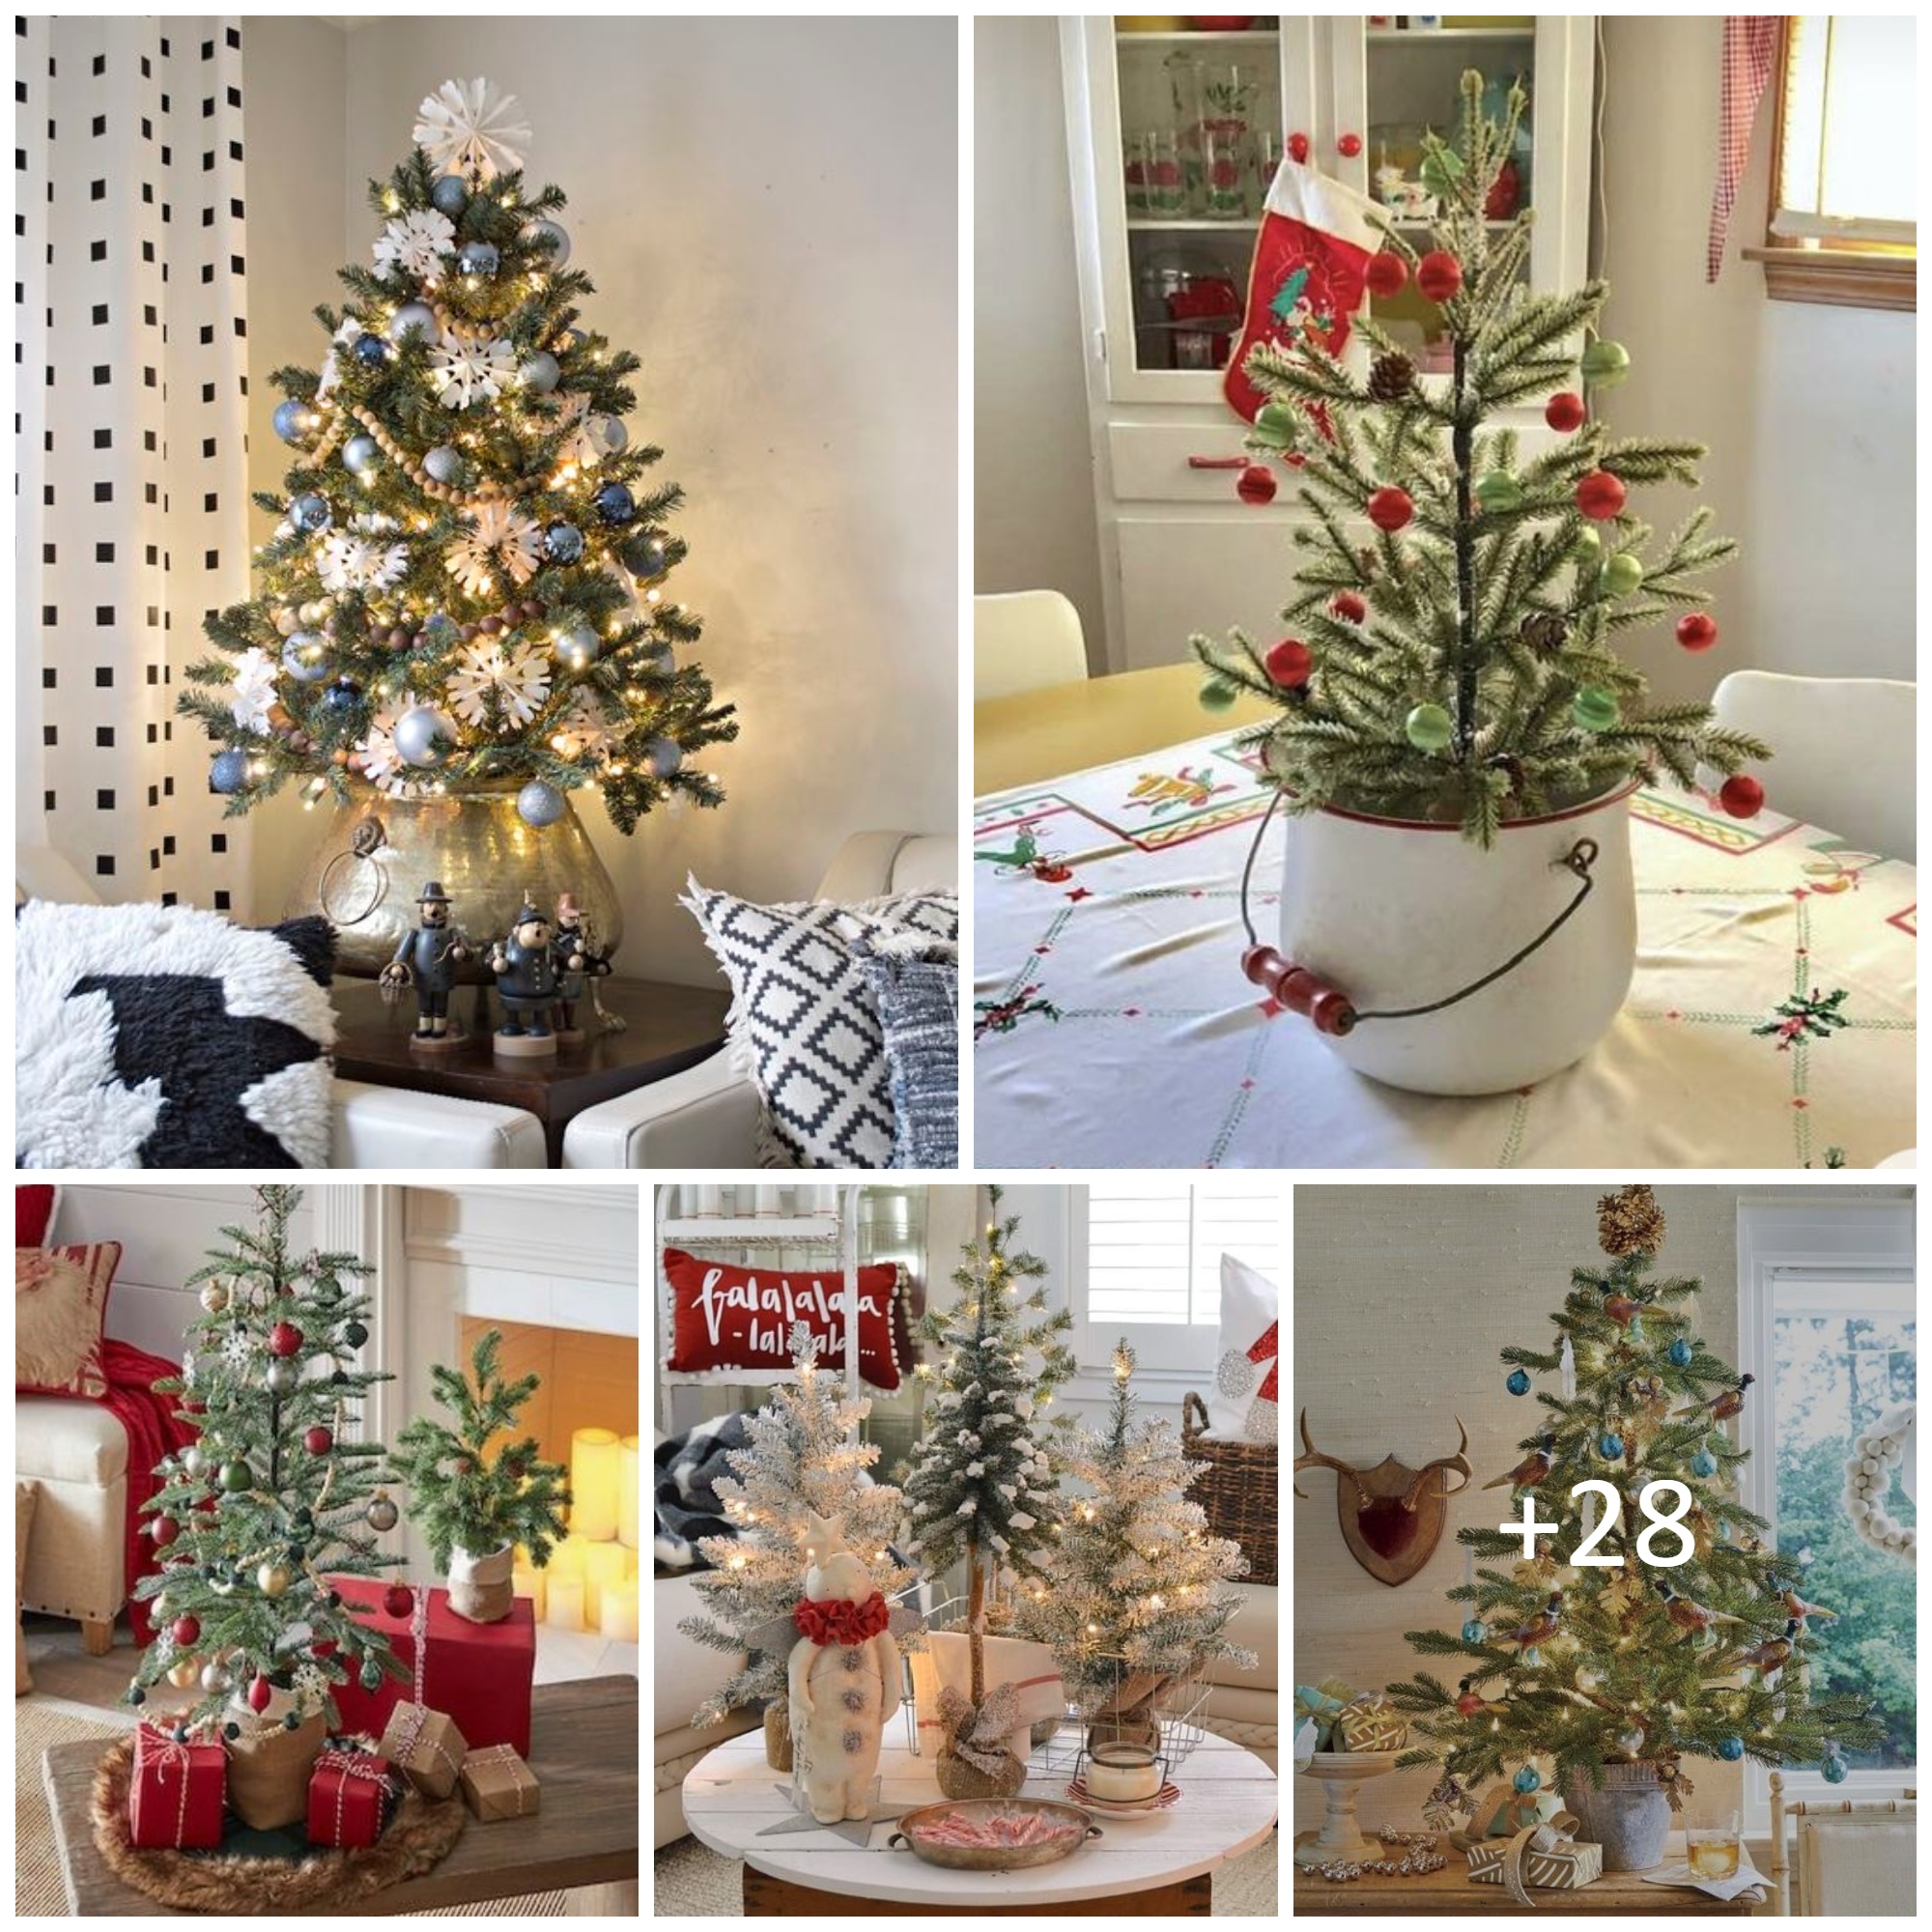 Tabletop Christmas Trees to Decorate Your Small Space